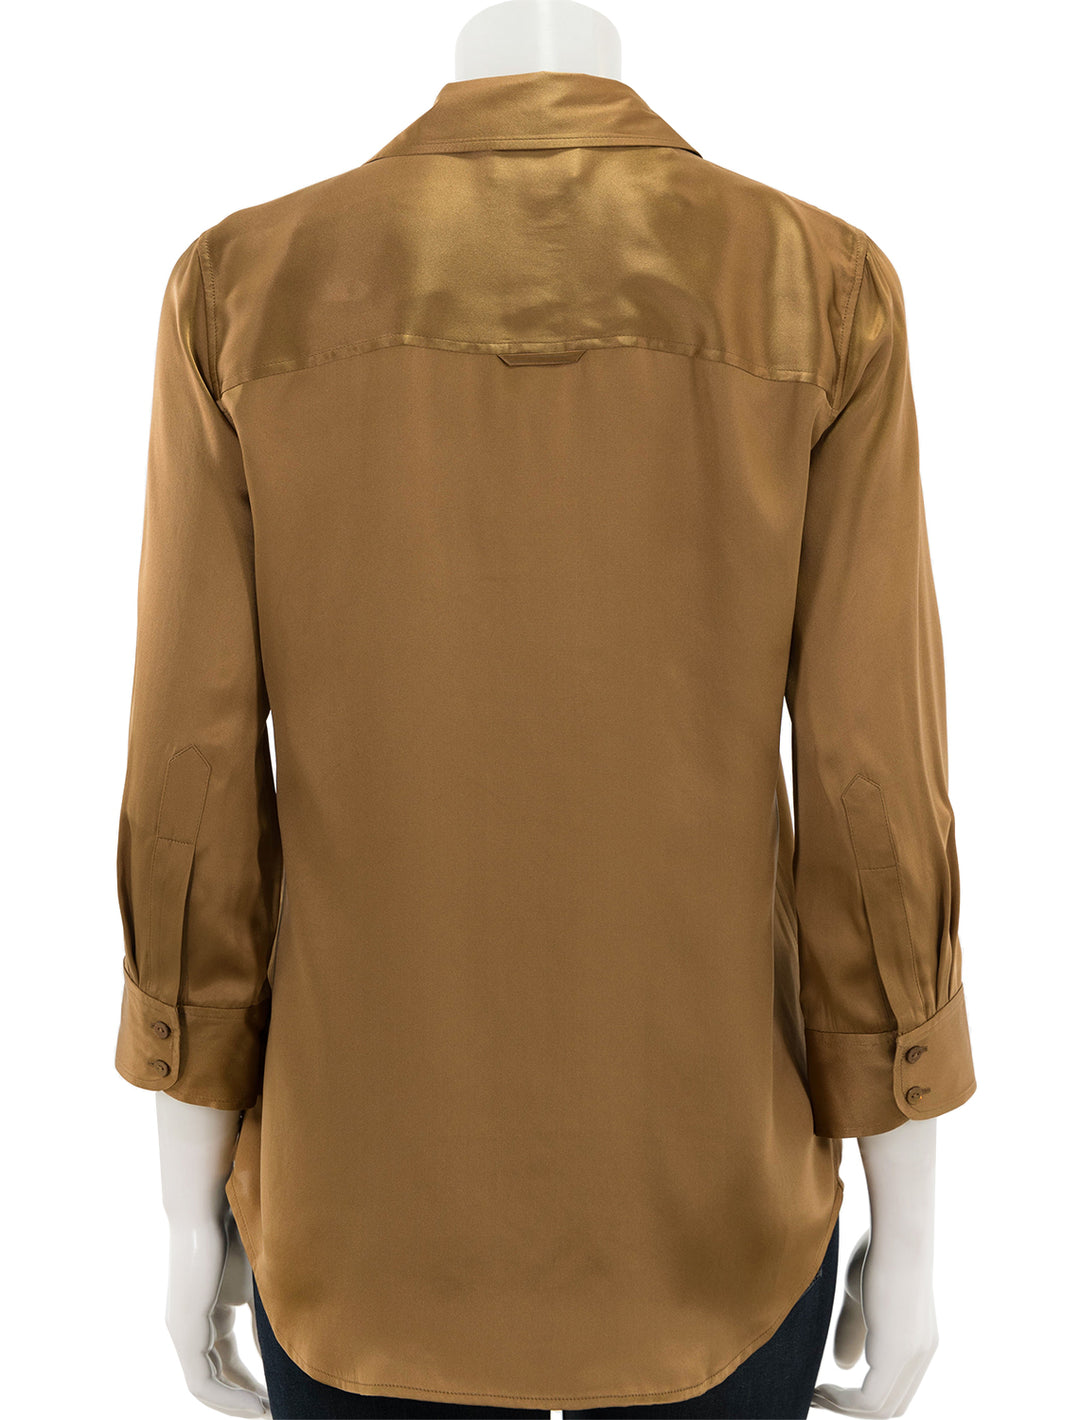 Back view of L'agence's dani shirt in biscotti.